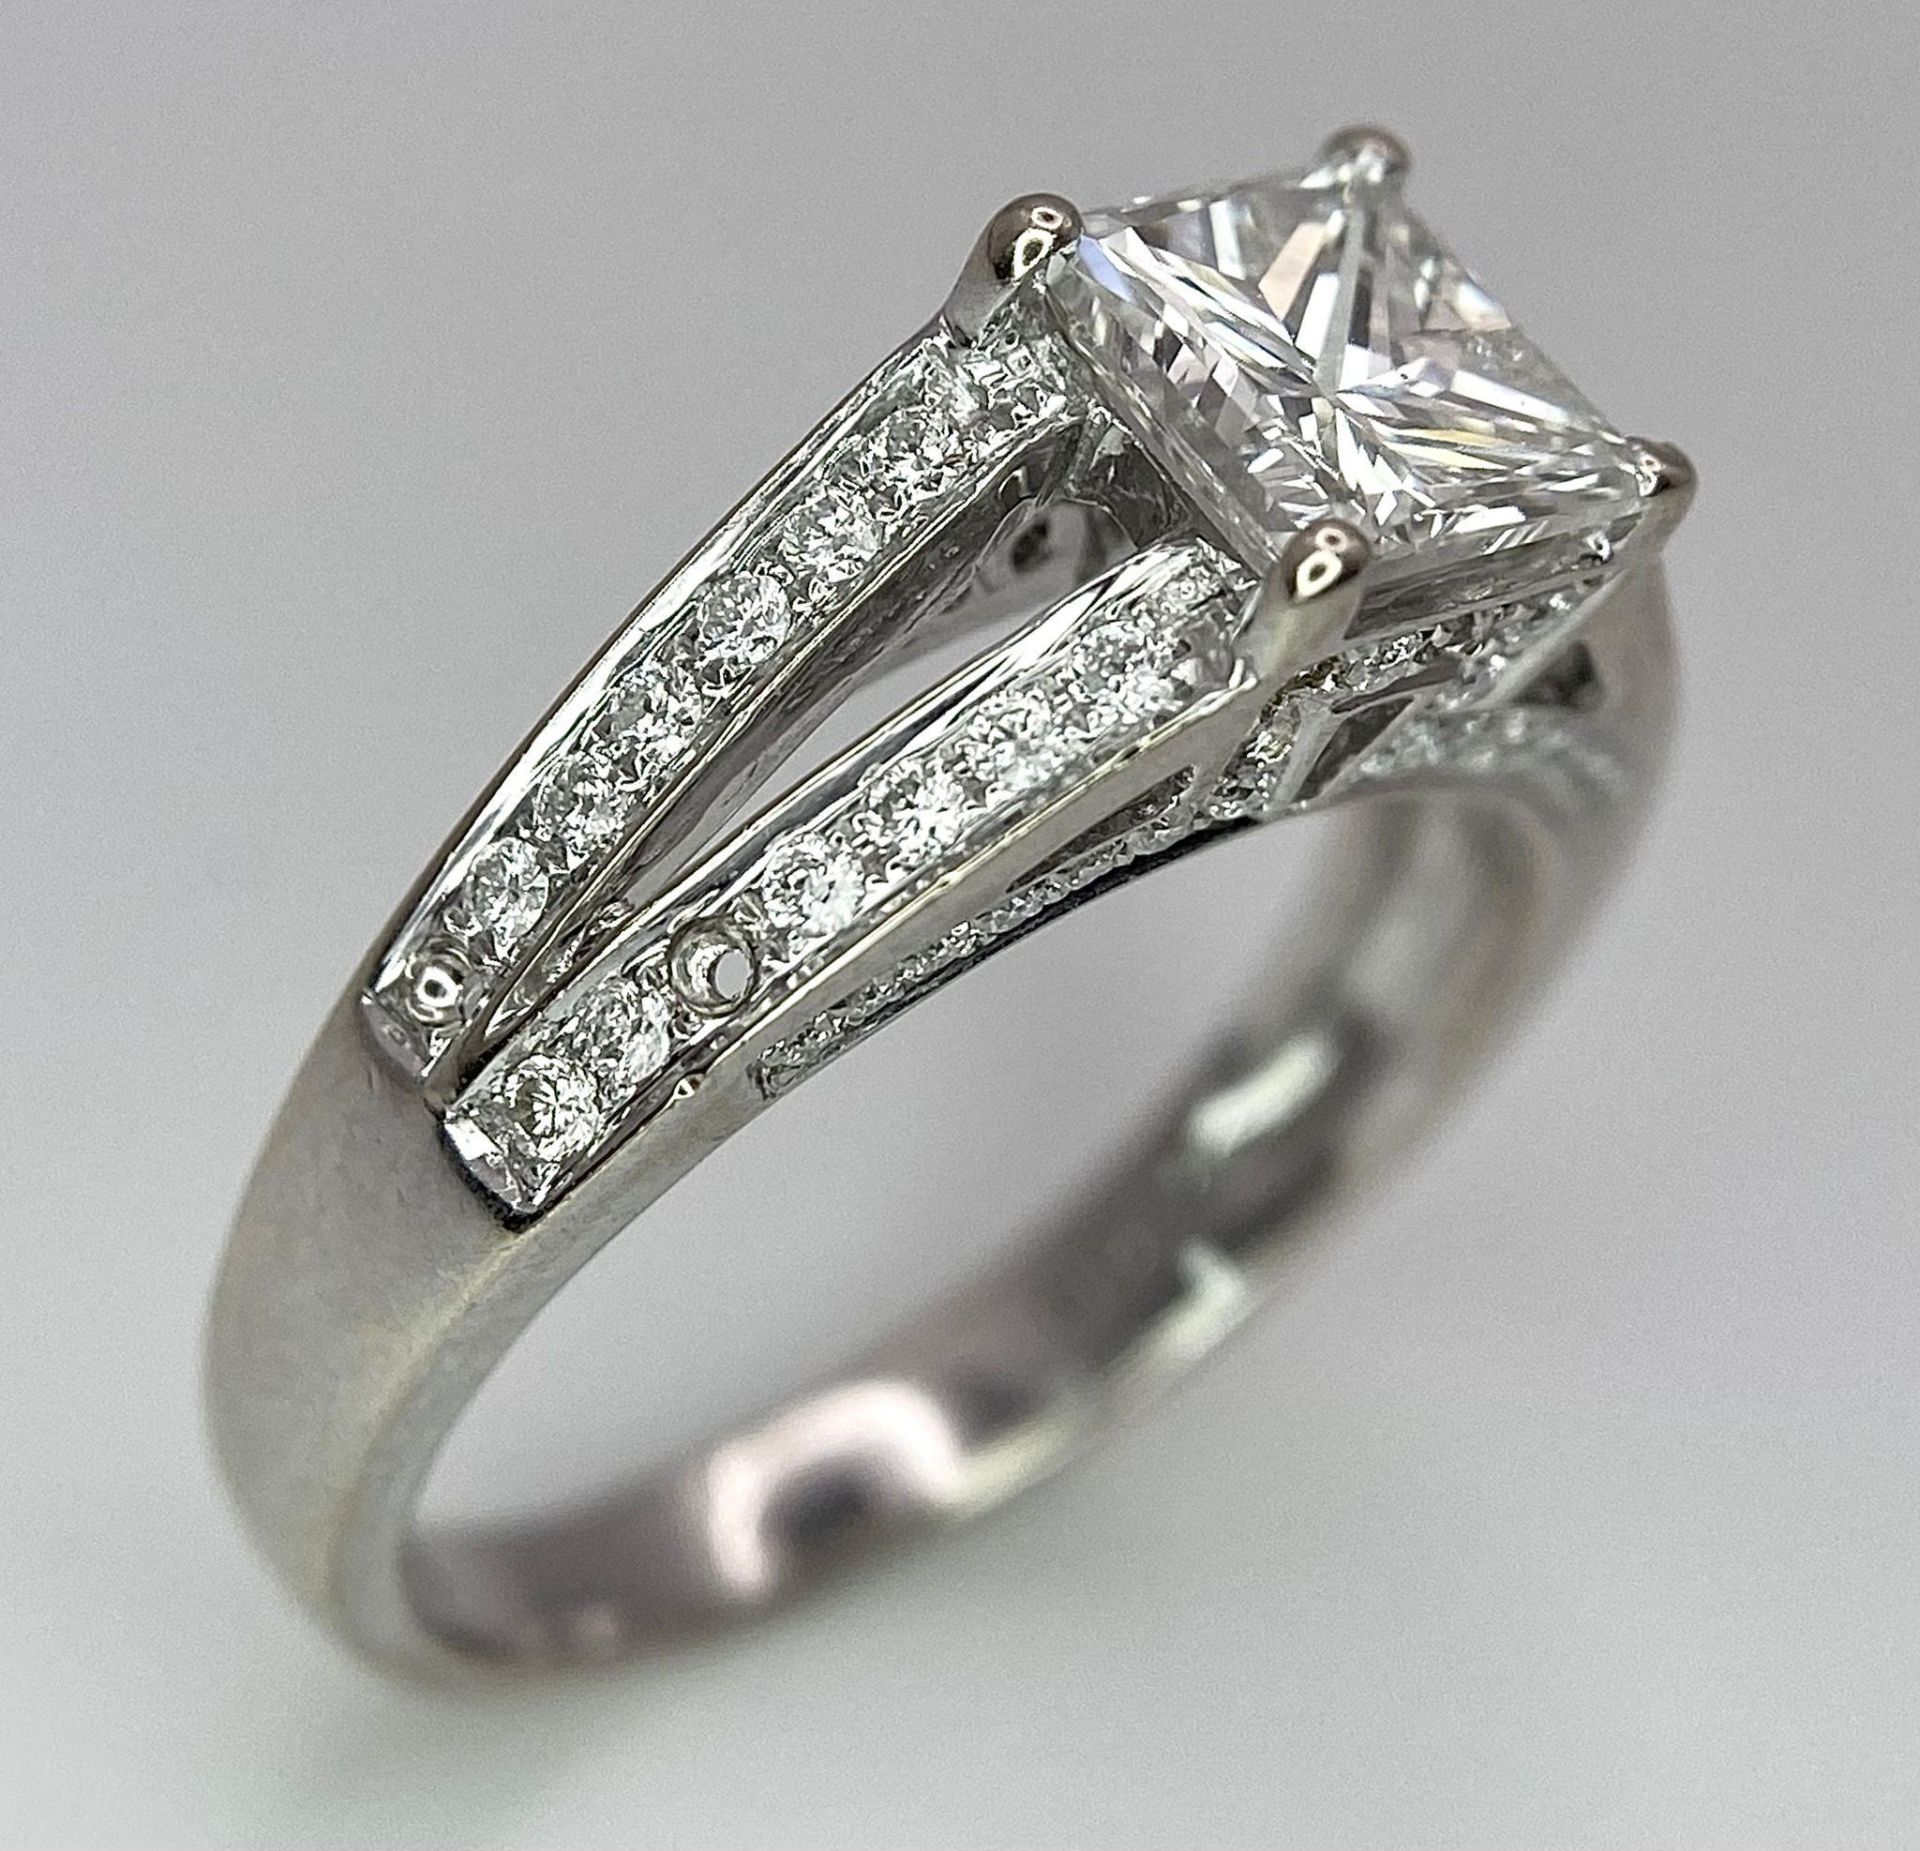 An 18K White Gold Diamond Ring. Central VS2 1ct Princess Cut Near White Diamond with Round Cut - Image 5 of 10